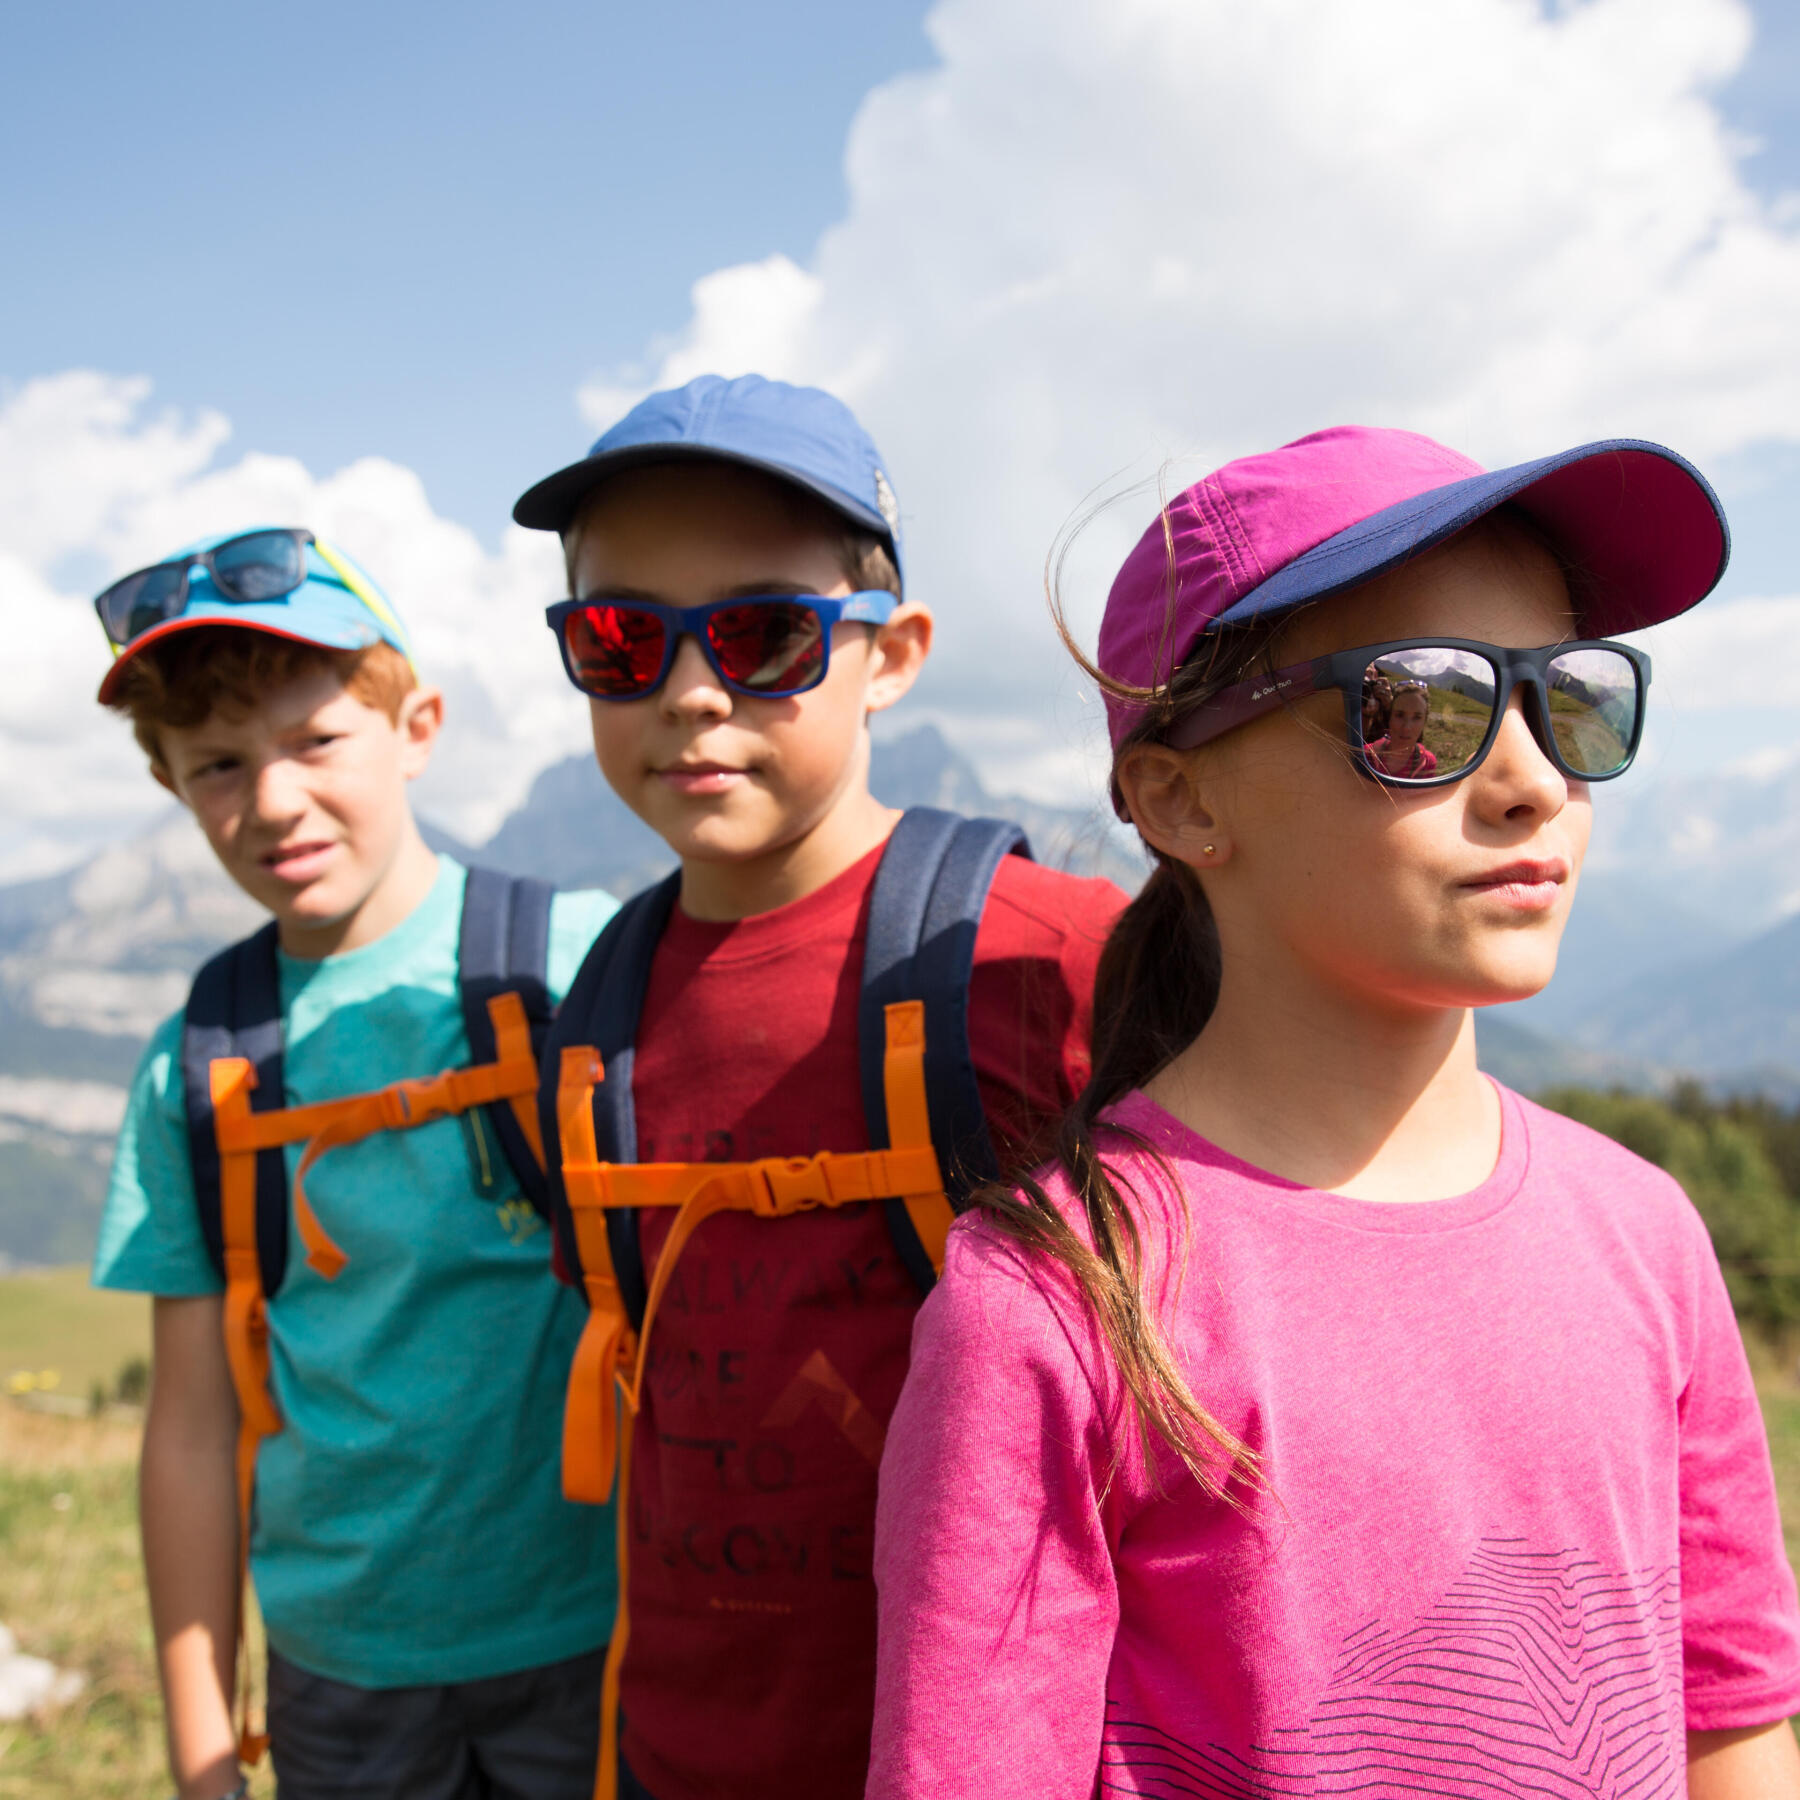 Choosing sunglasses for your child